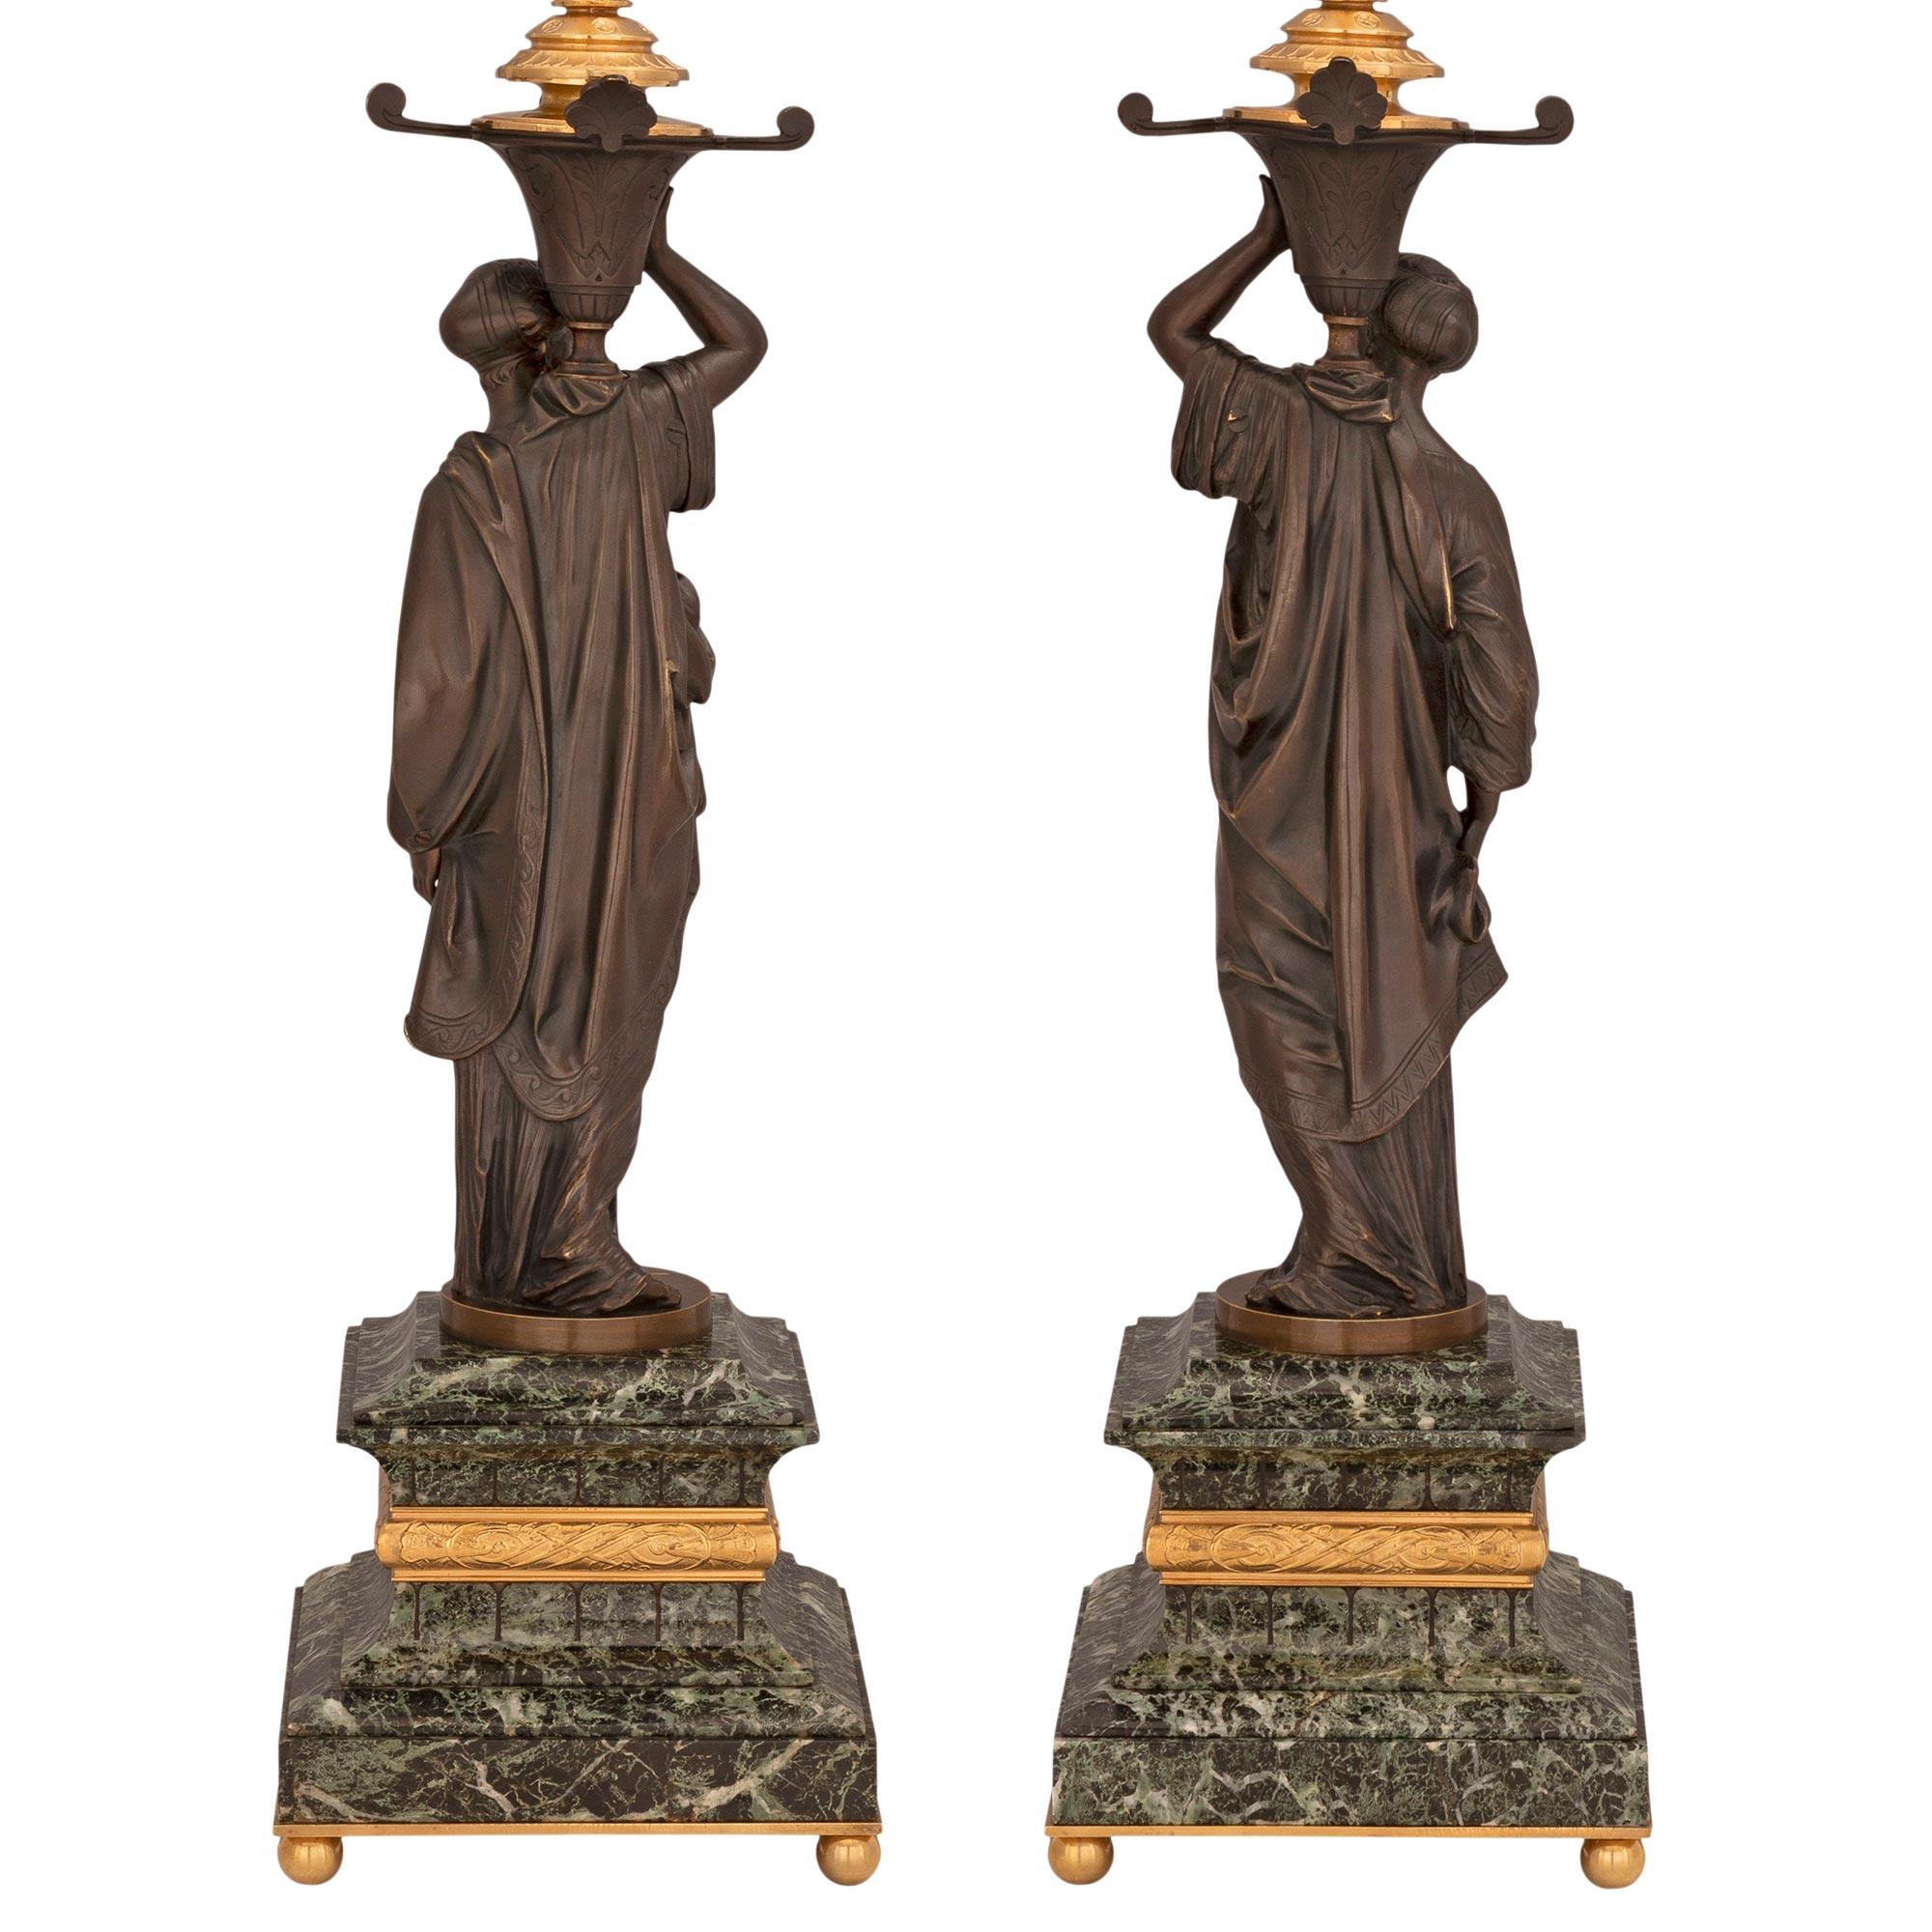 A most elegant and high quality true pair of French 19th century Neo-Classical st. patinated bronze, ormolu and Vert de Patricia marble lamps. Each lamp is raised by four fine ball shaped ormolu feet below the striking square Vert de Patricia marble